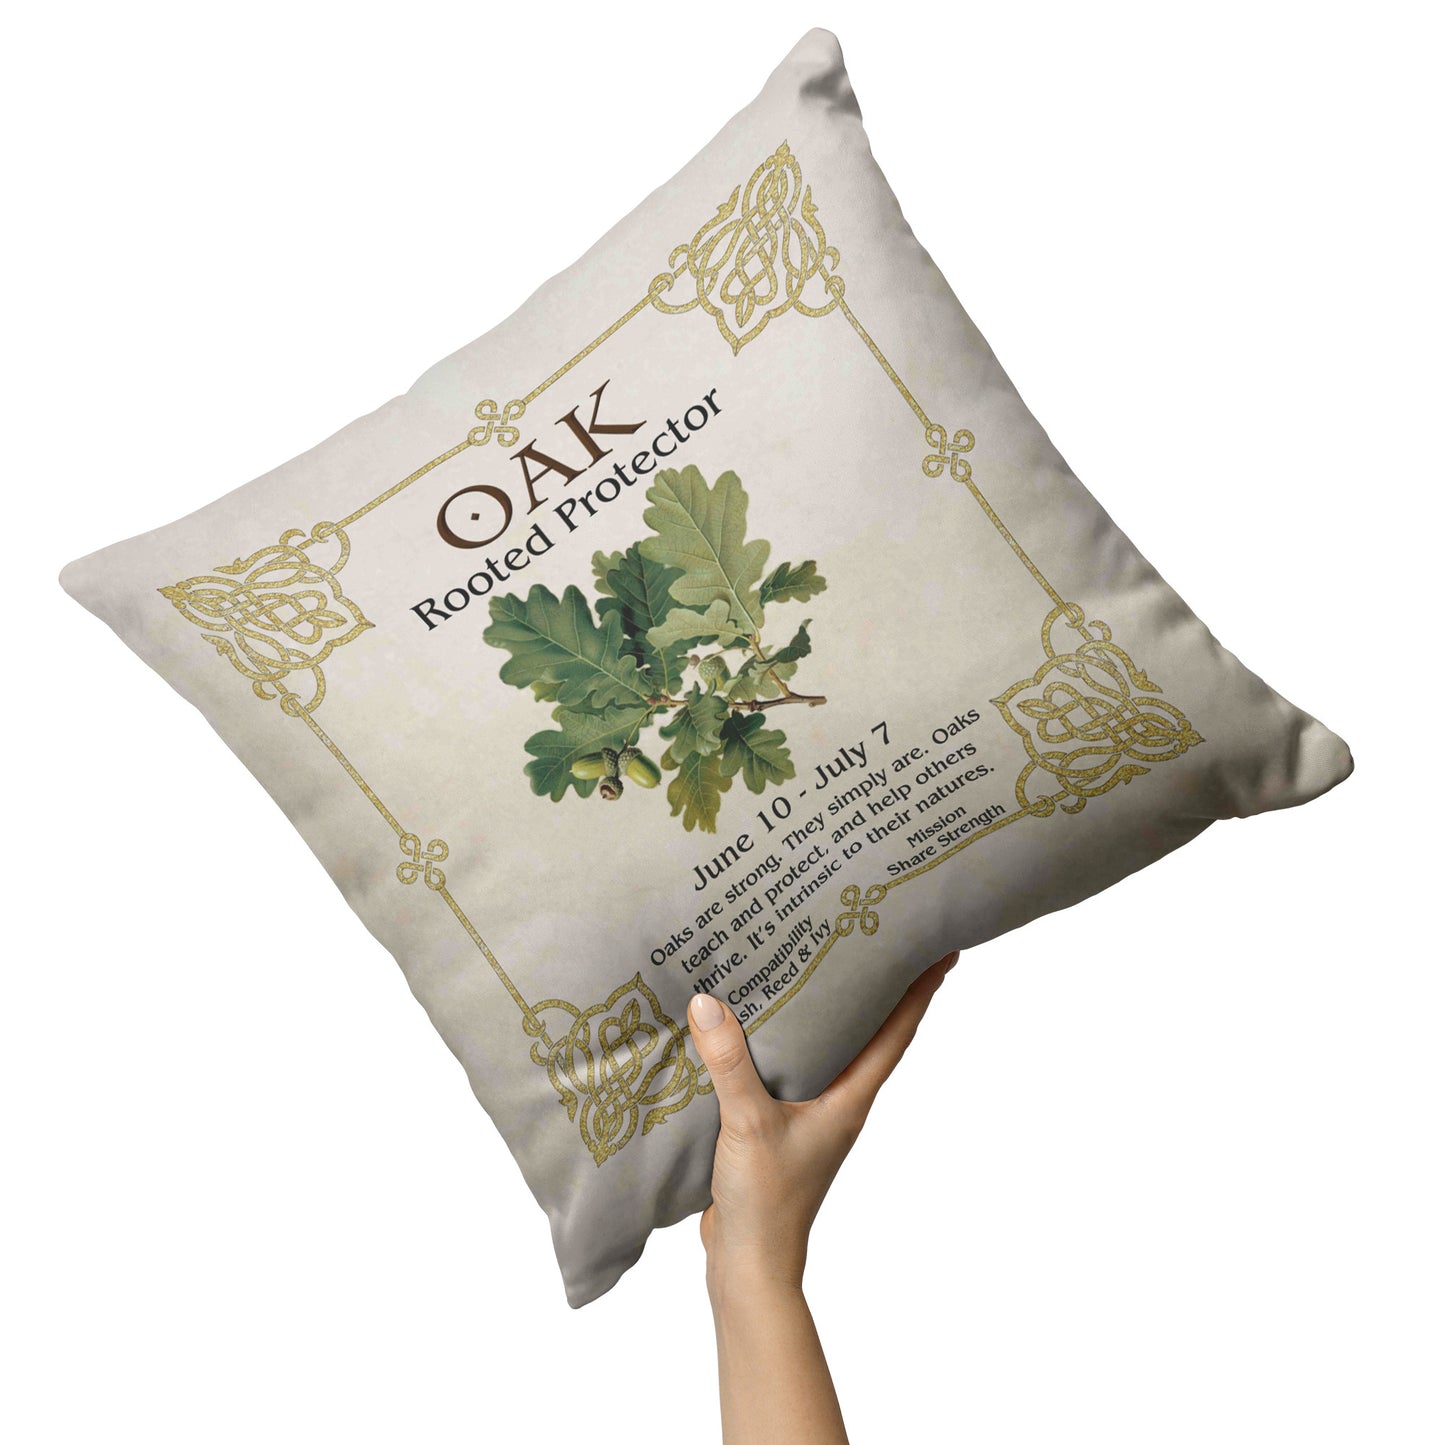 Celtic Tree Zodiac - Oak, Rooted Protector - Throw Pillow